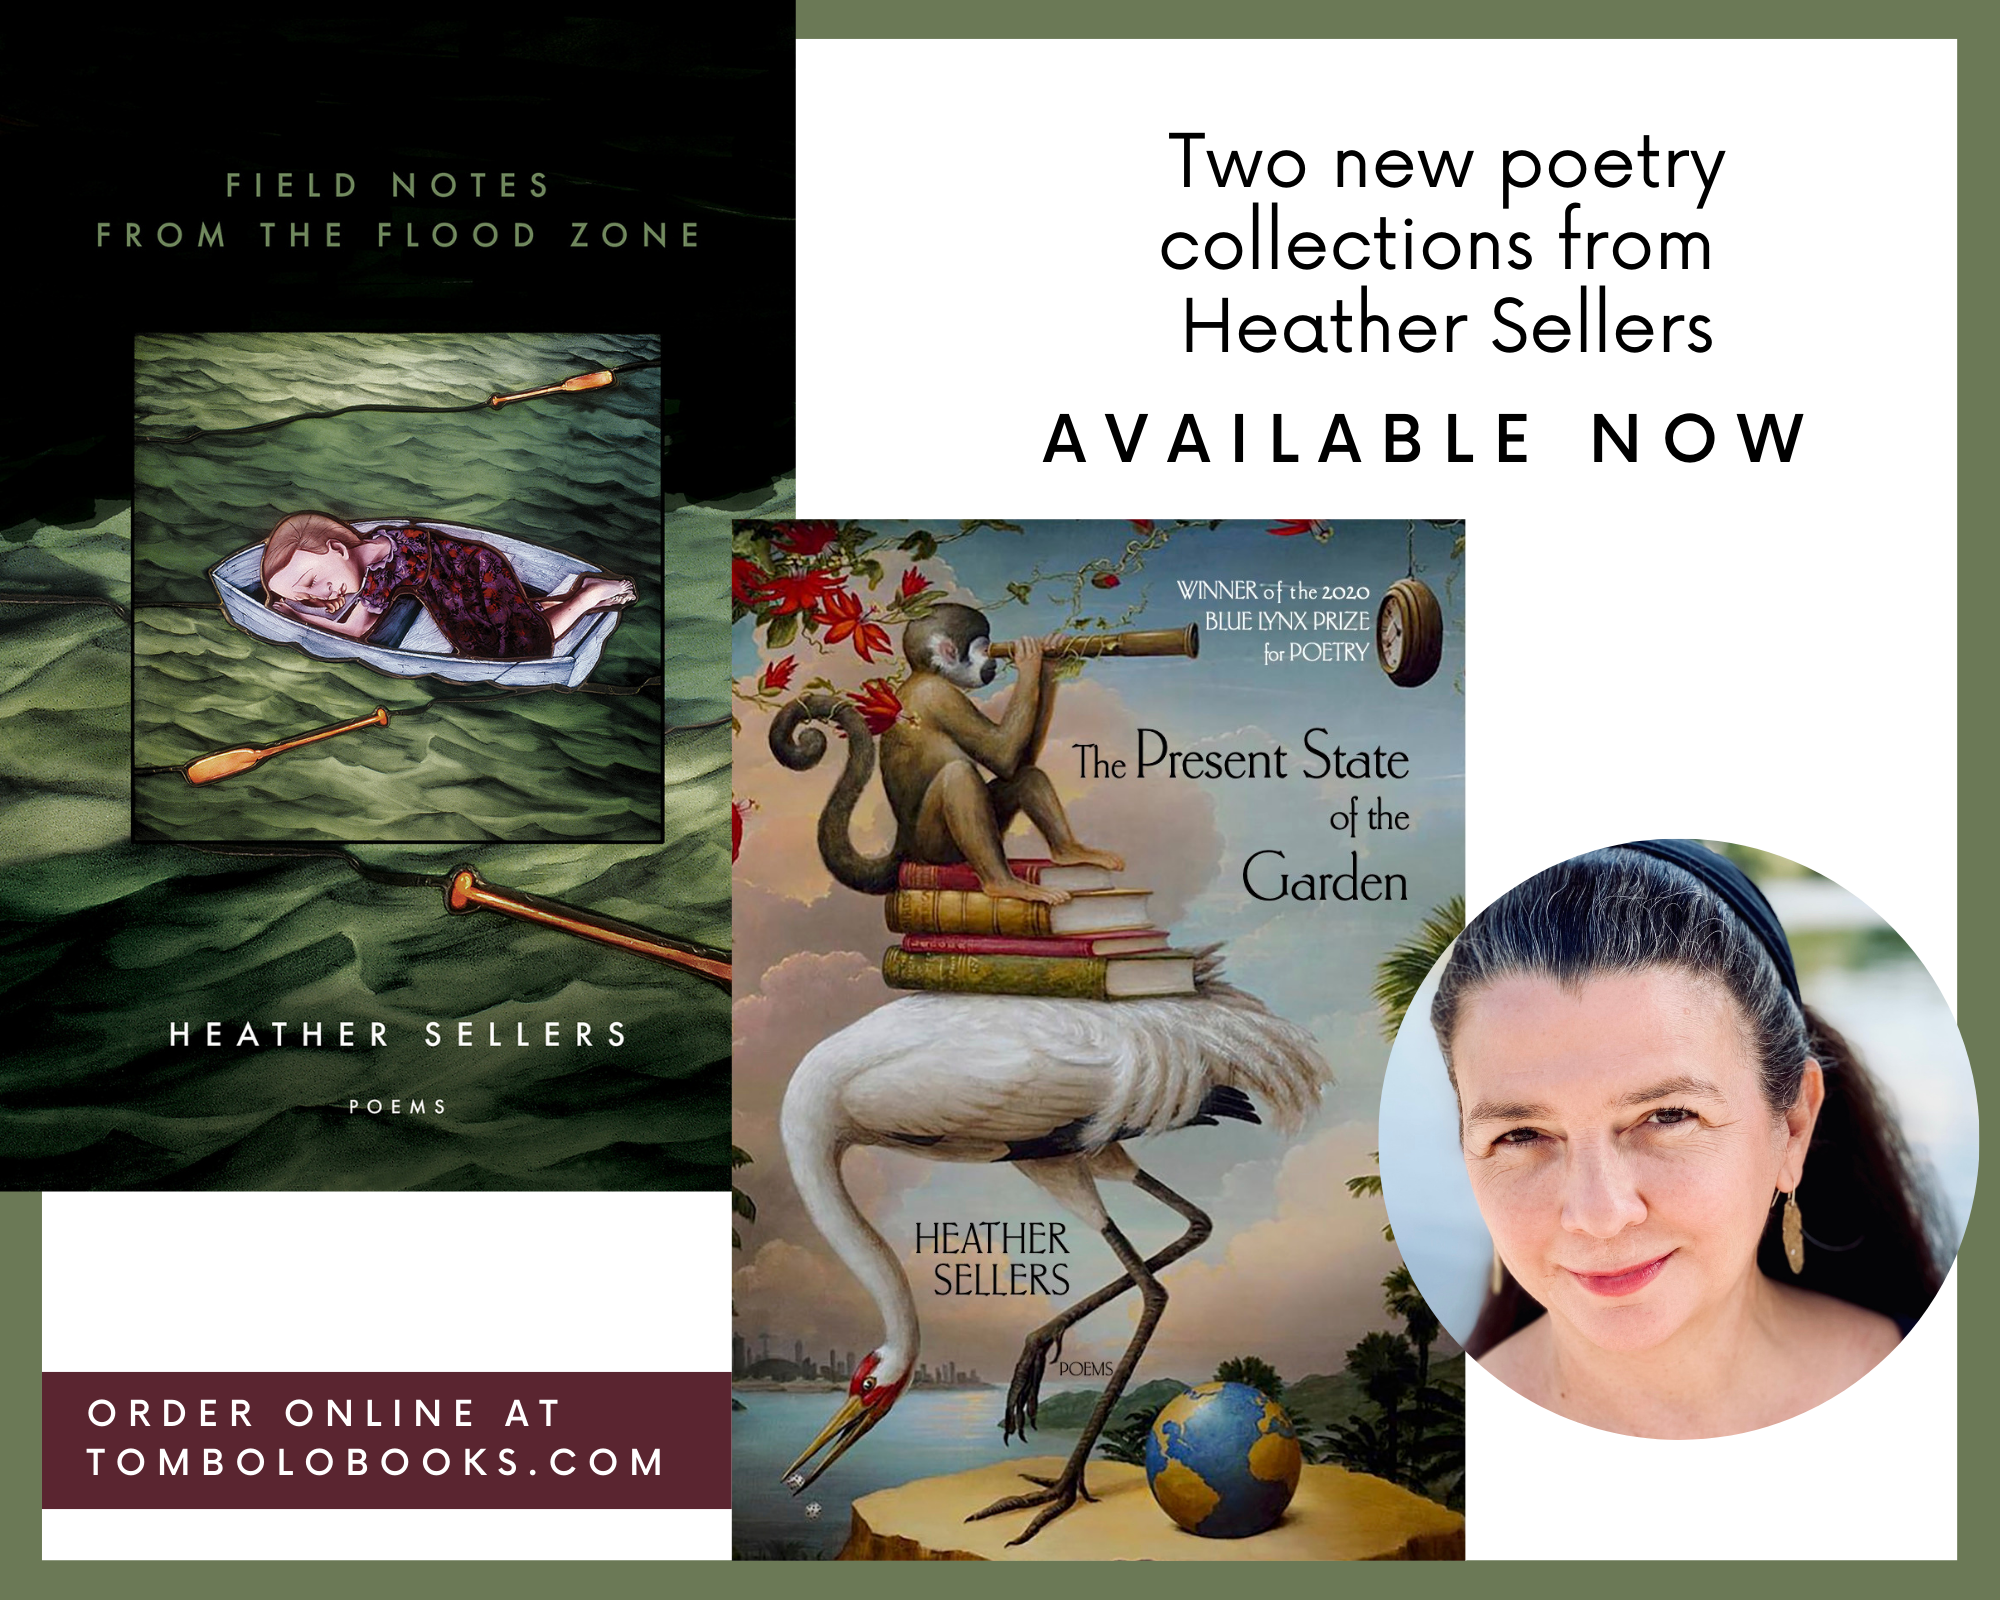 Two new poetry collections from Heather Sellers are available now